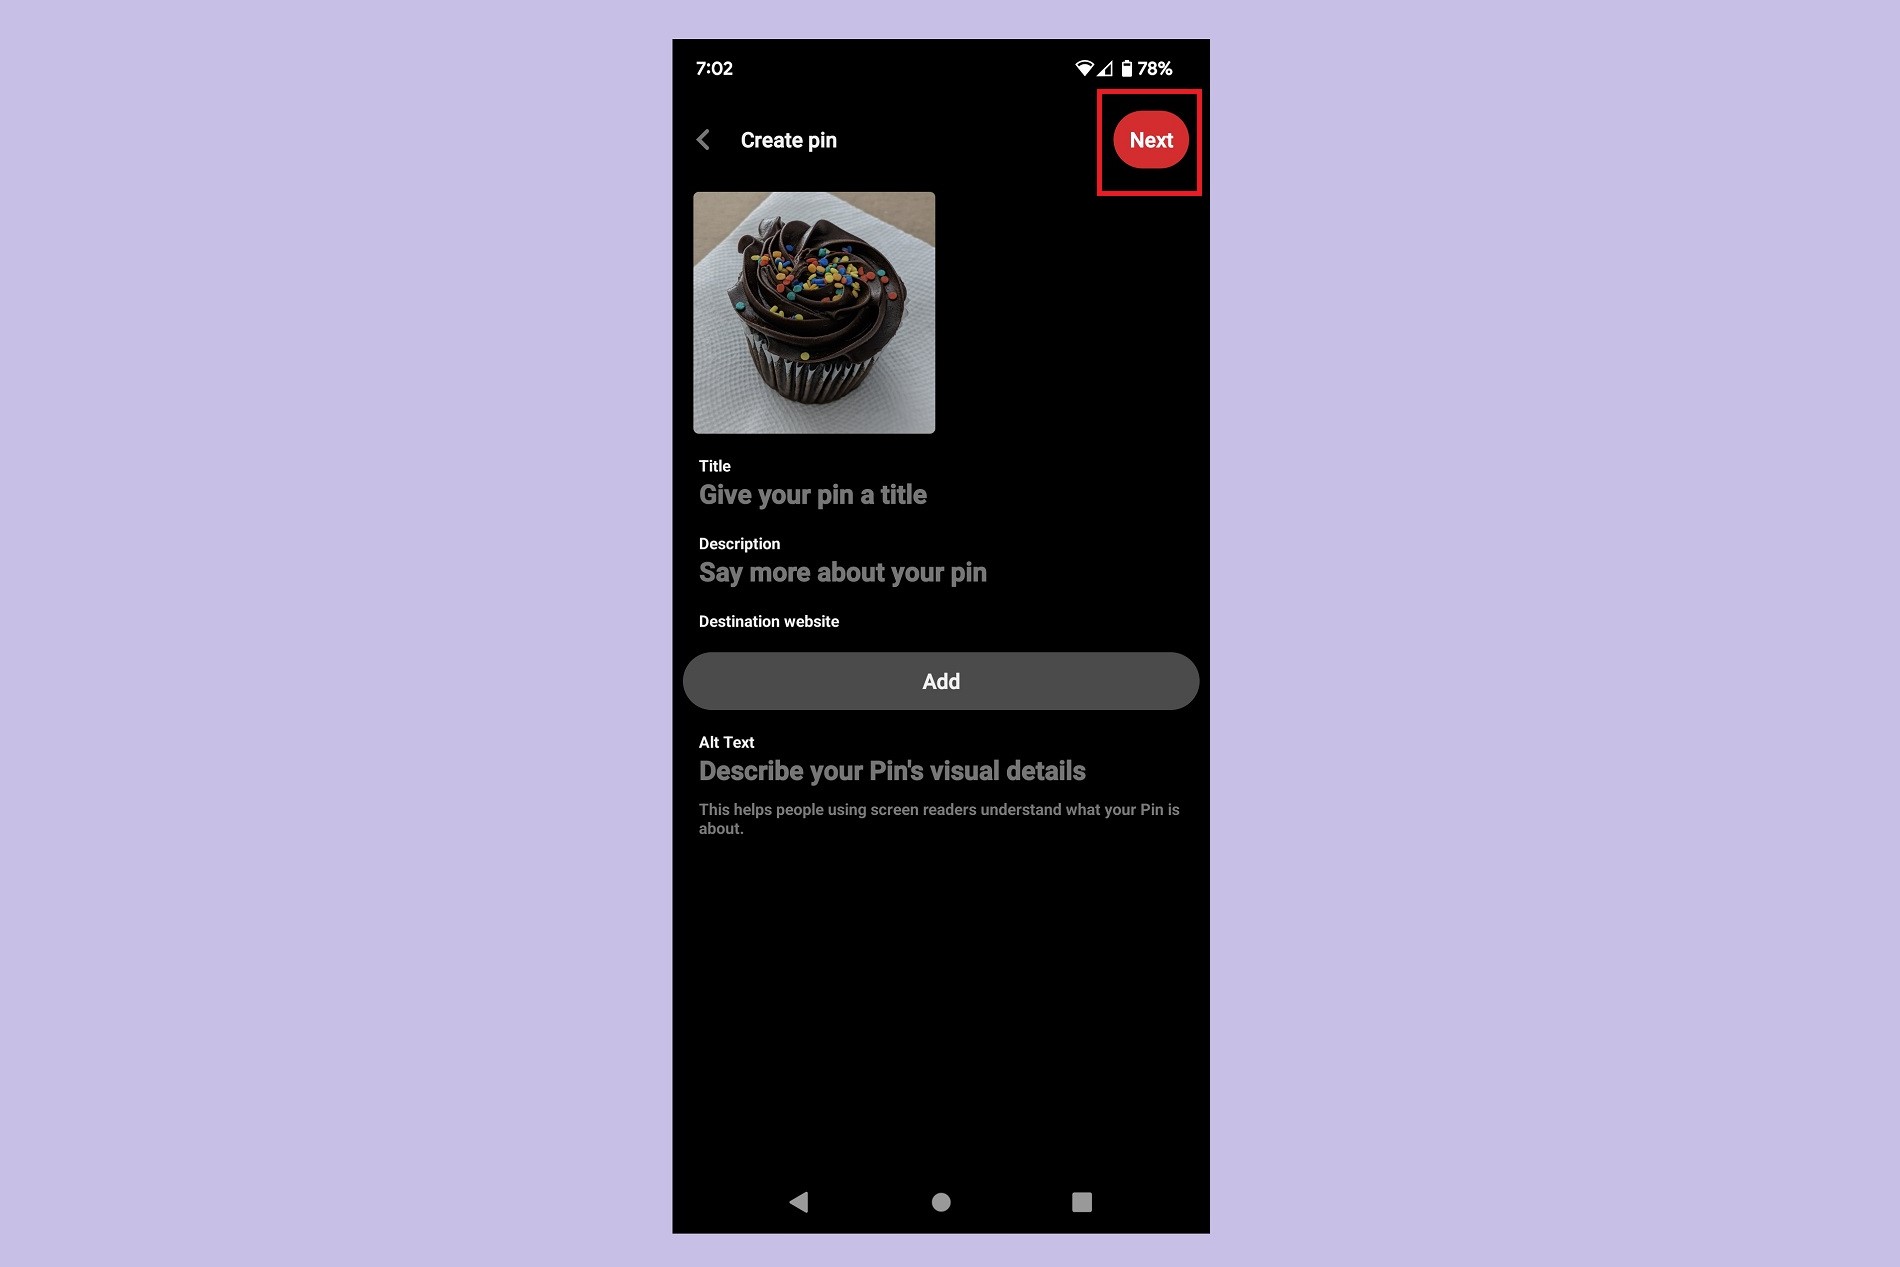 The Create pin screen on the Pinterest Android mobile app.